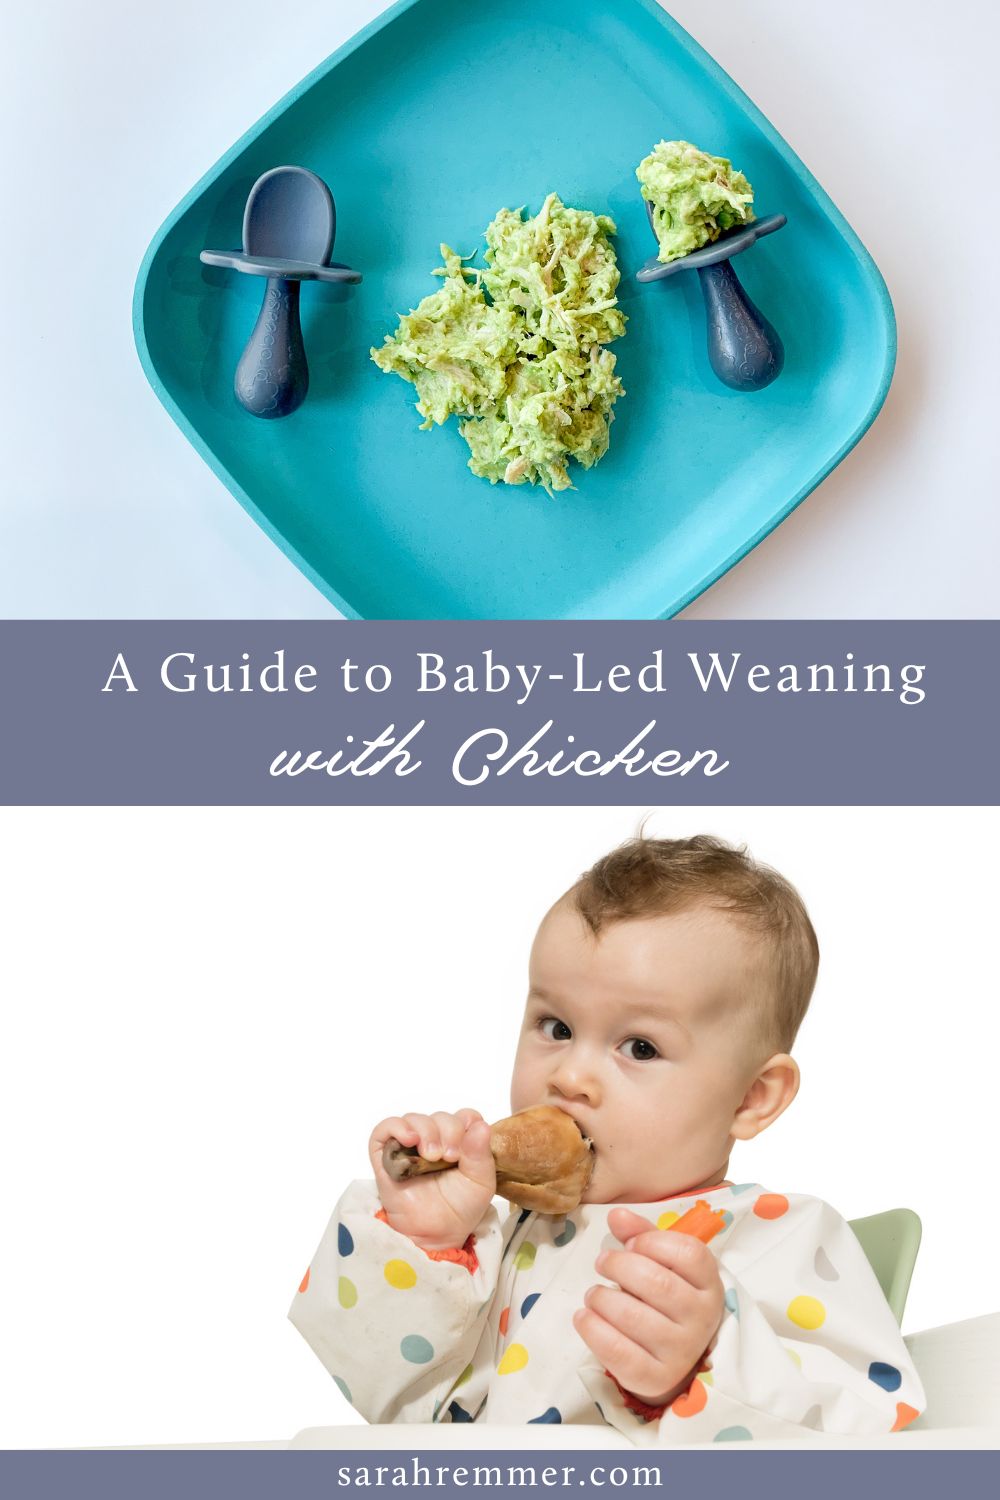 Here is everything you need to know about baby-led weaning with chicken, from a pediatric registered dietitian. Whether you’re doing baby-led weaning, spoon-feeding, or a combination, this post will walk you through, step-by-step how to safely introduce chicken to your baby.